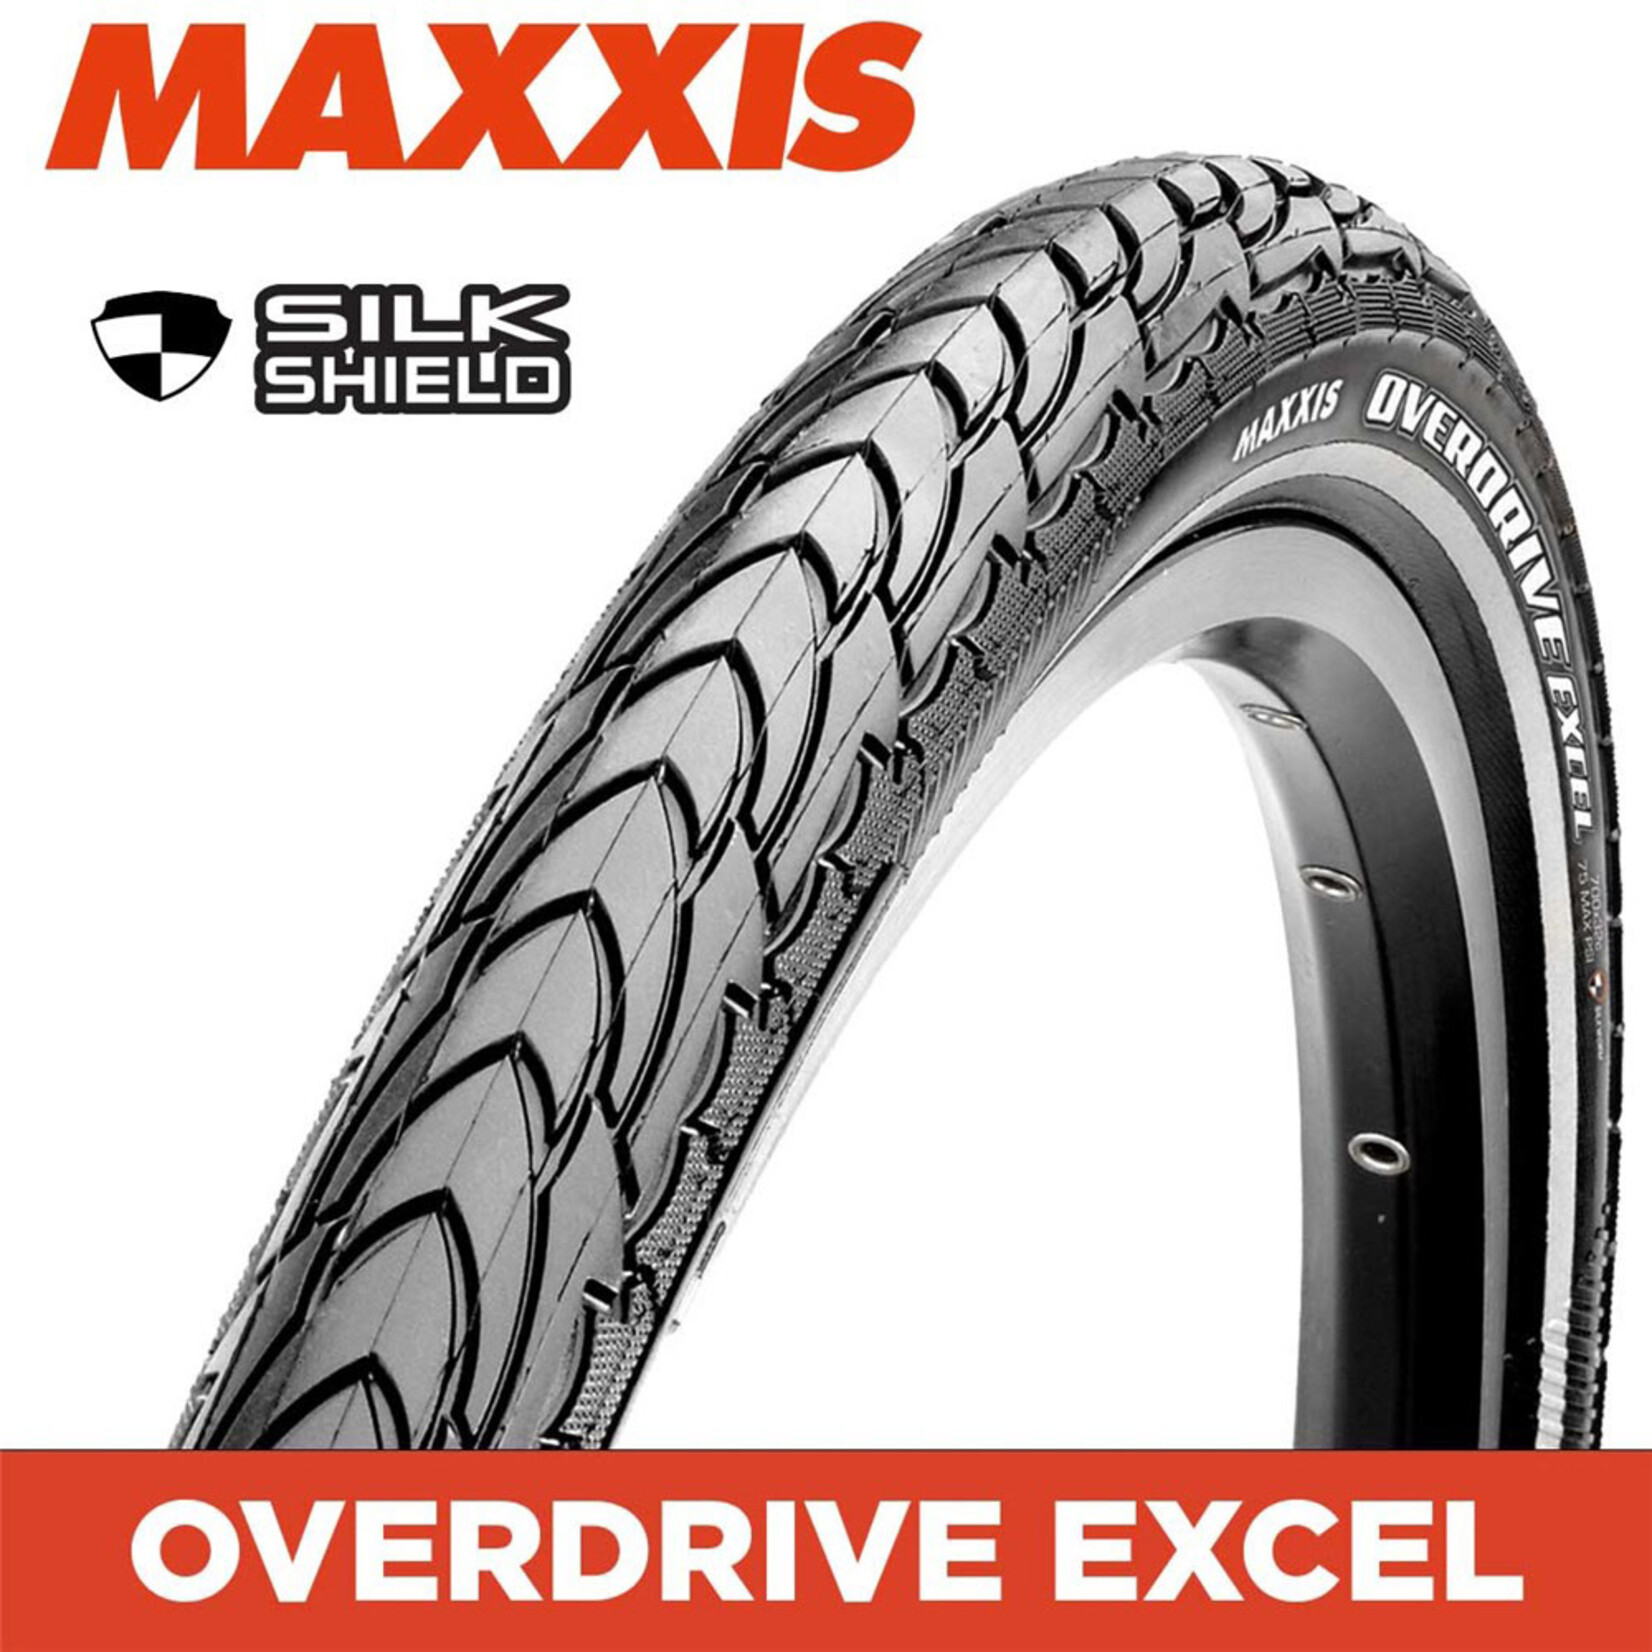 MAXXIS MAXXIS Overdrive EXCEL - 700 X 35 Wirebead 60TPI